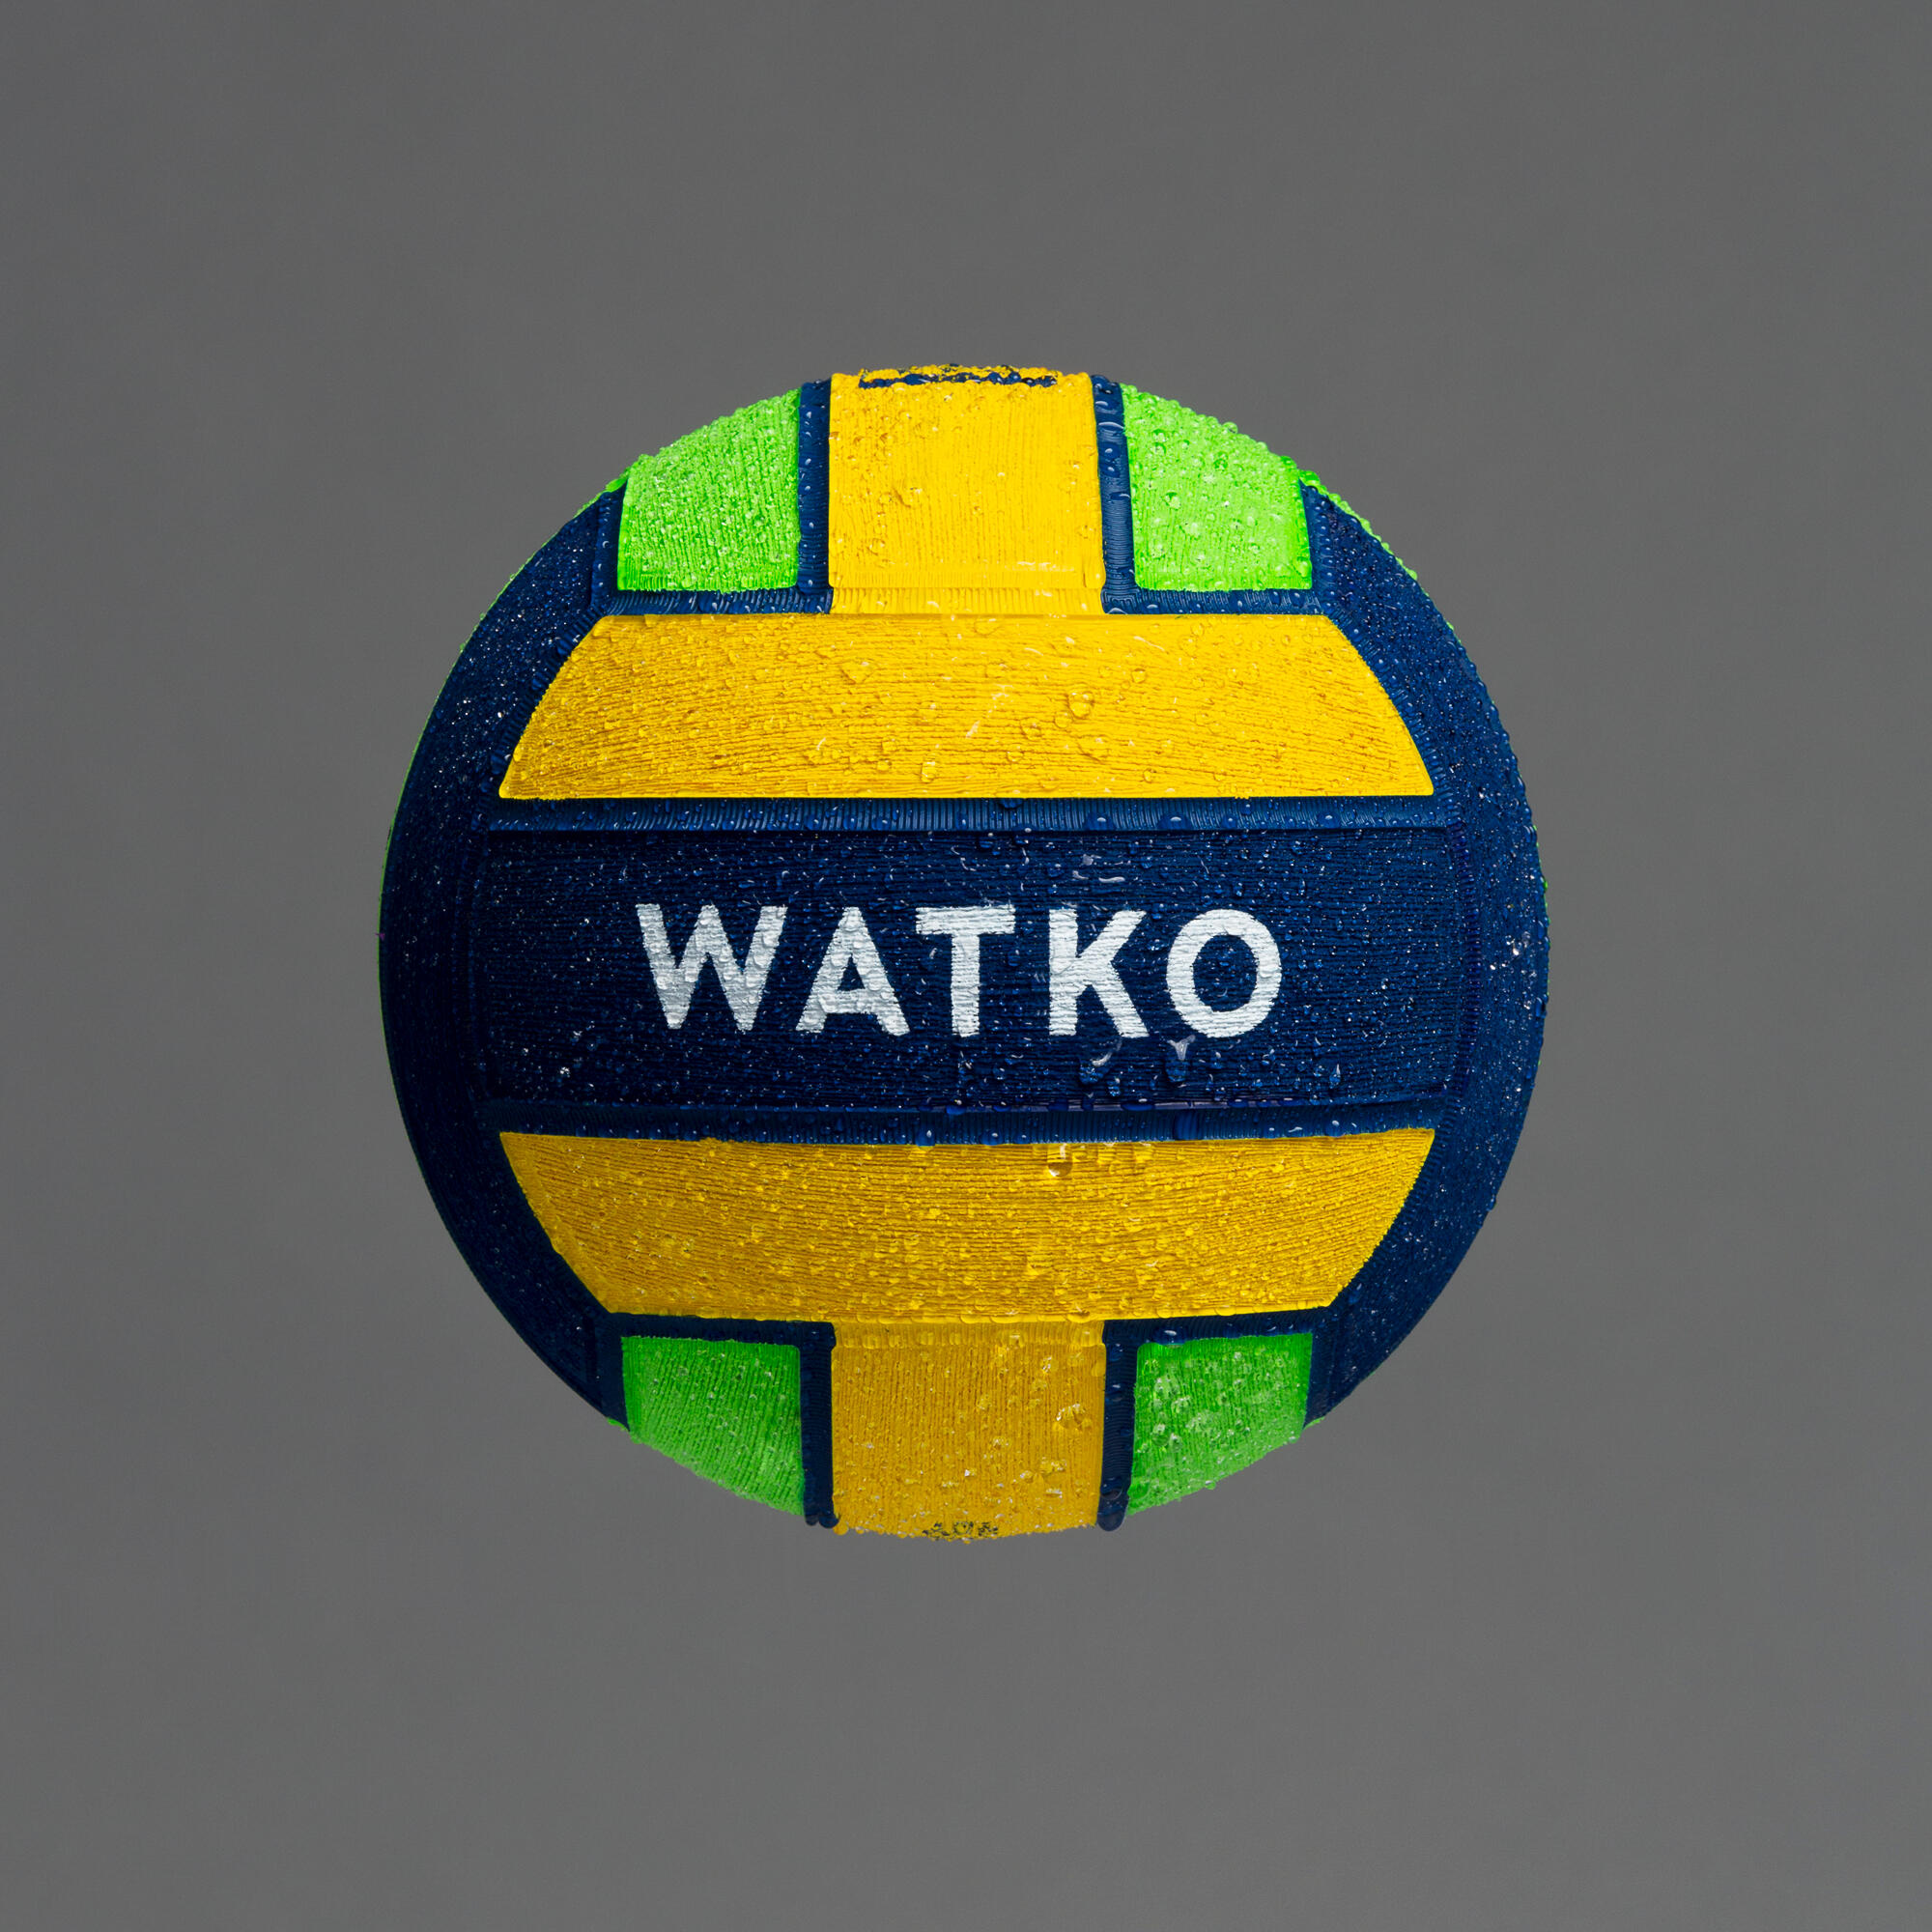 WATER POLO BALL WP900 SIZE 3 1/5